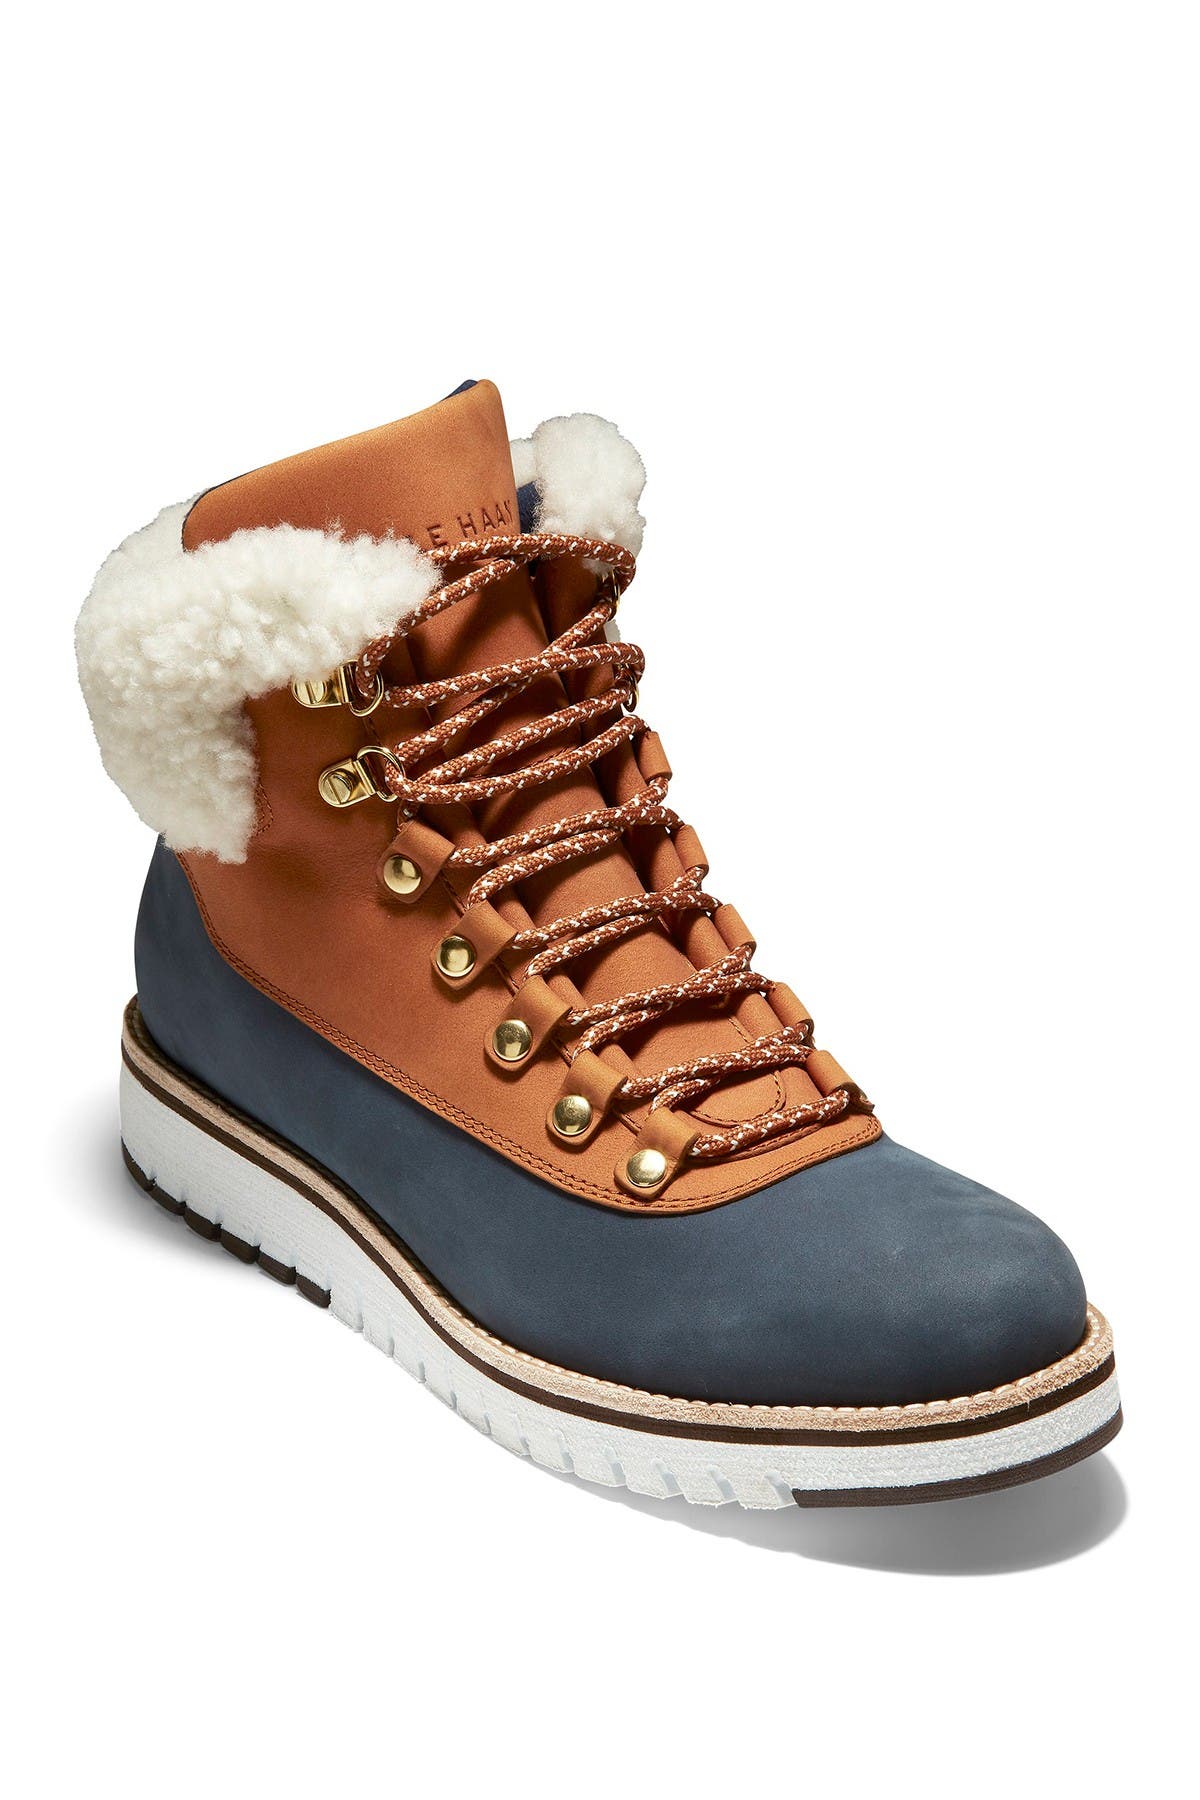 cole haan weather boots